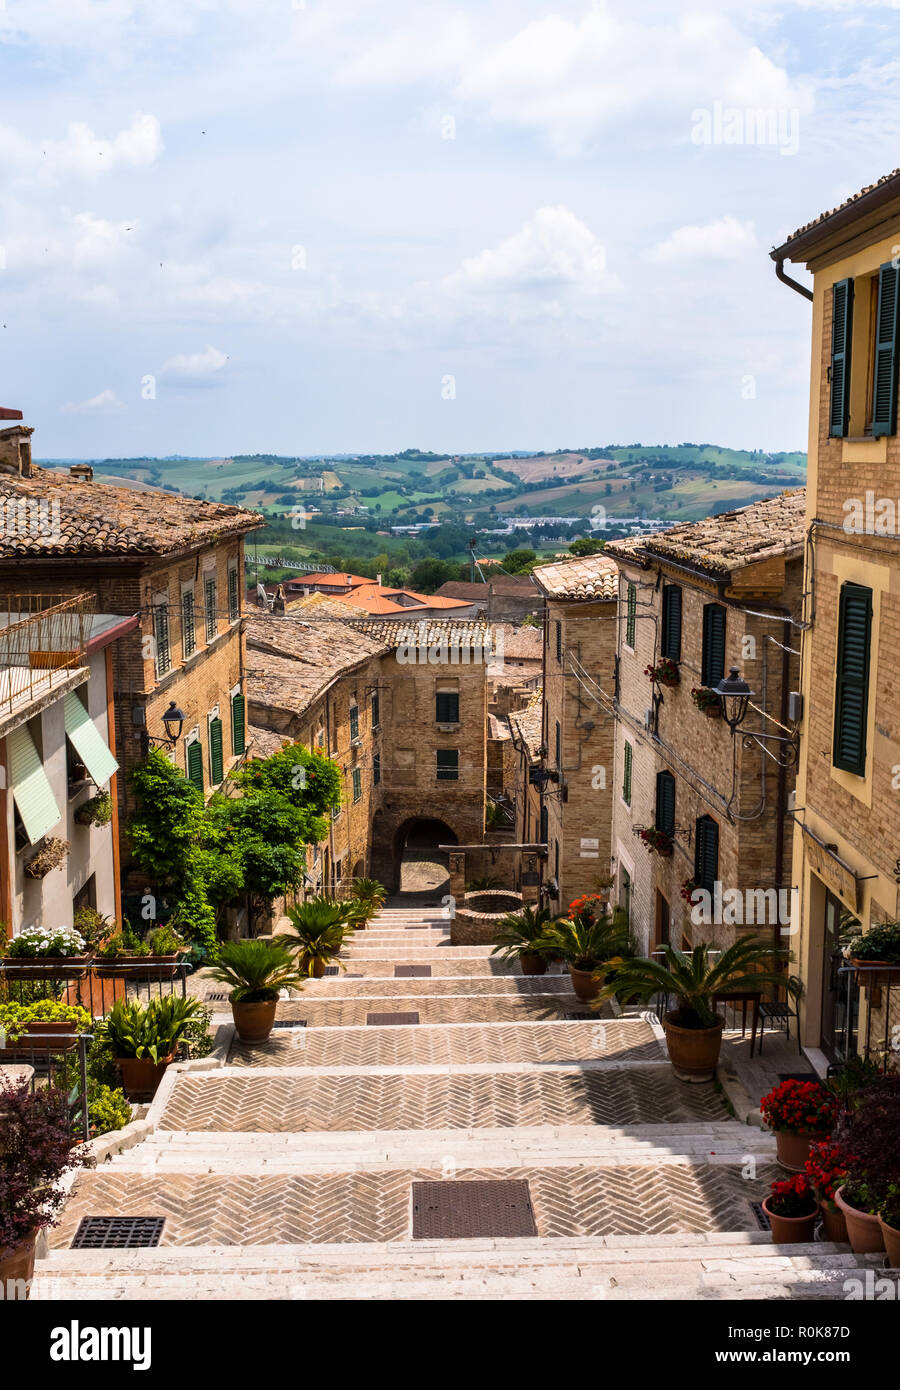 Scenes and details from the charming Italian village of Corinaldo, in the Marche region of Italy Stock Photo